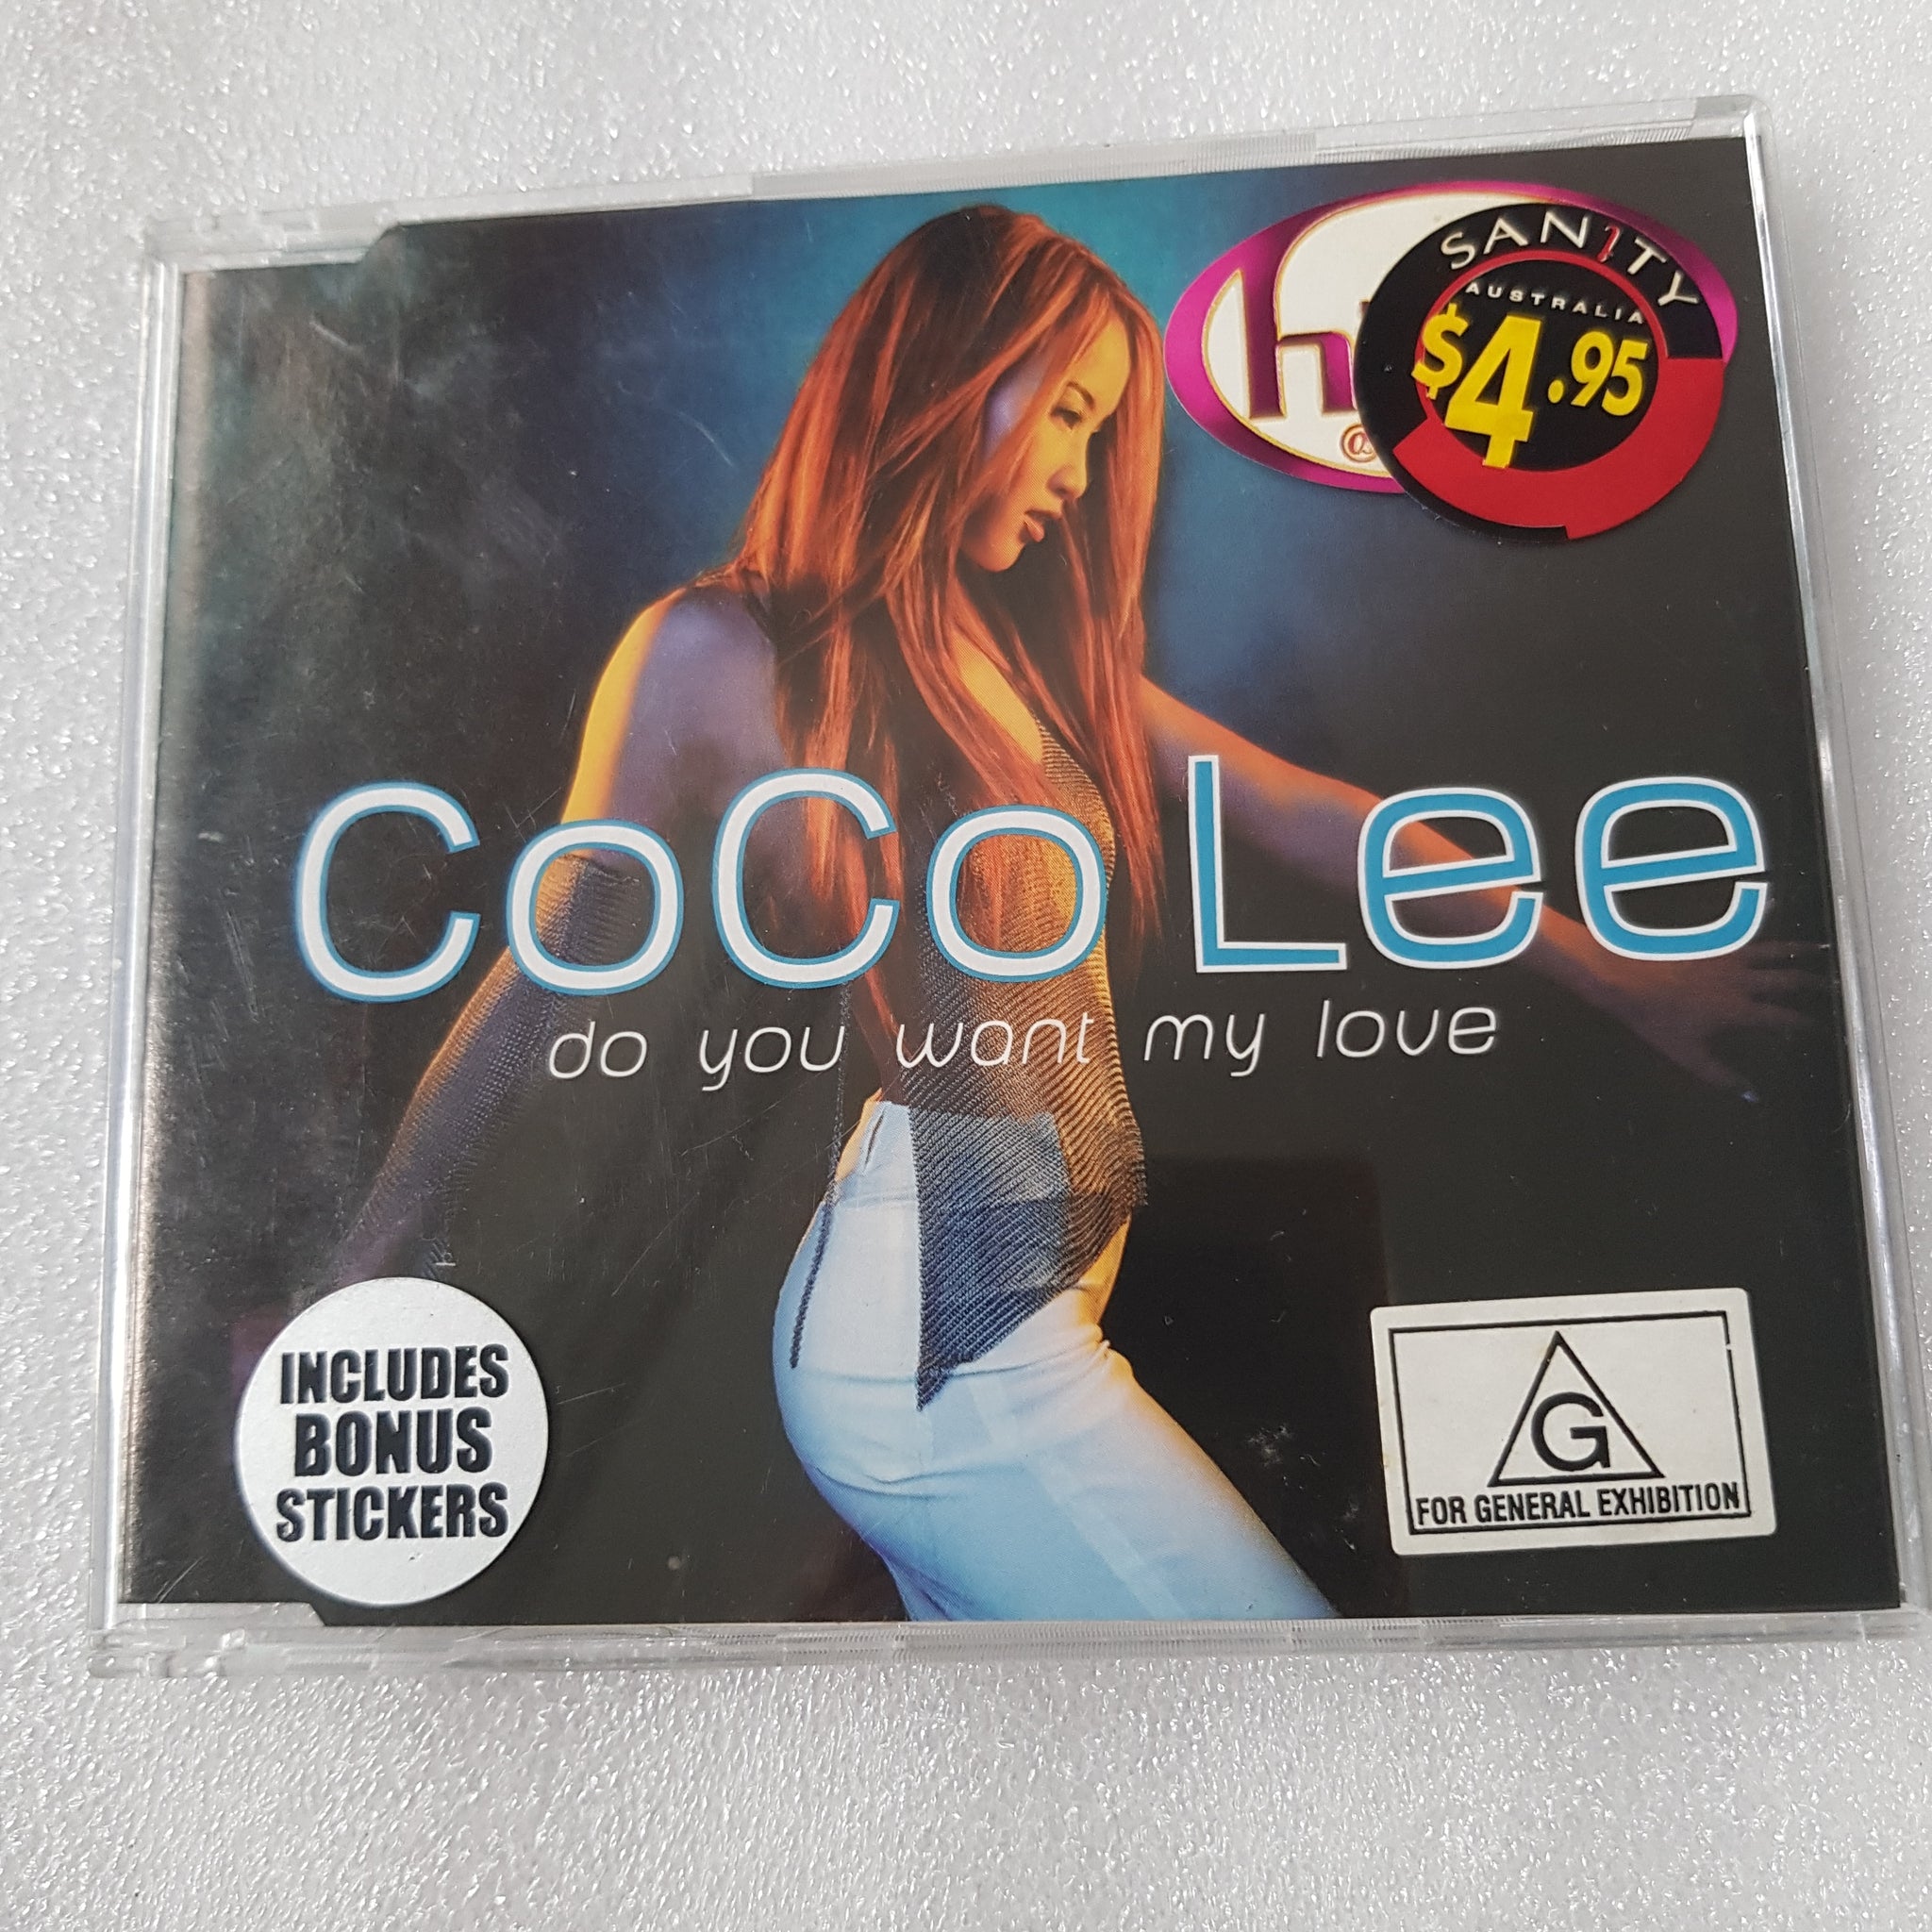 CD coco lee 李玟do you want my love jewel case little scratches 少花